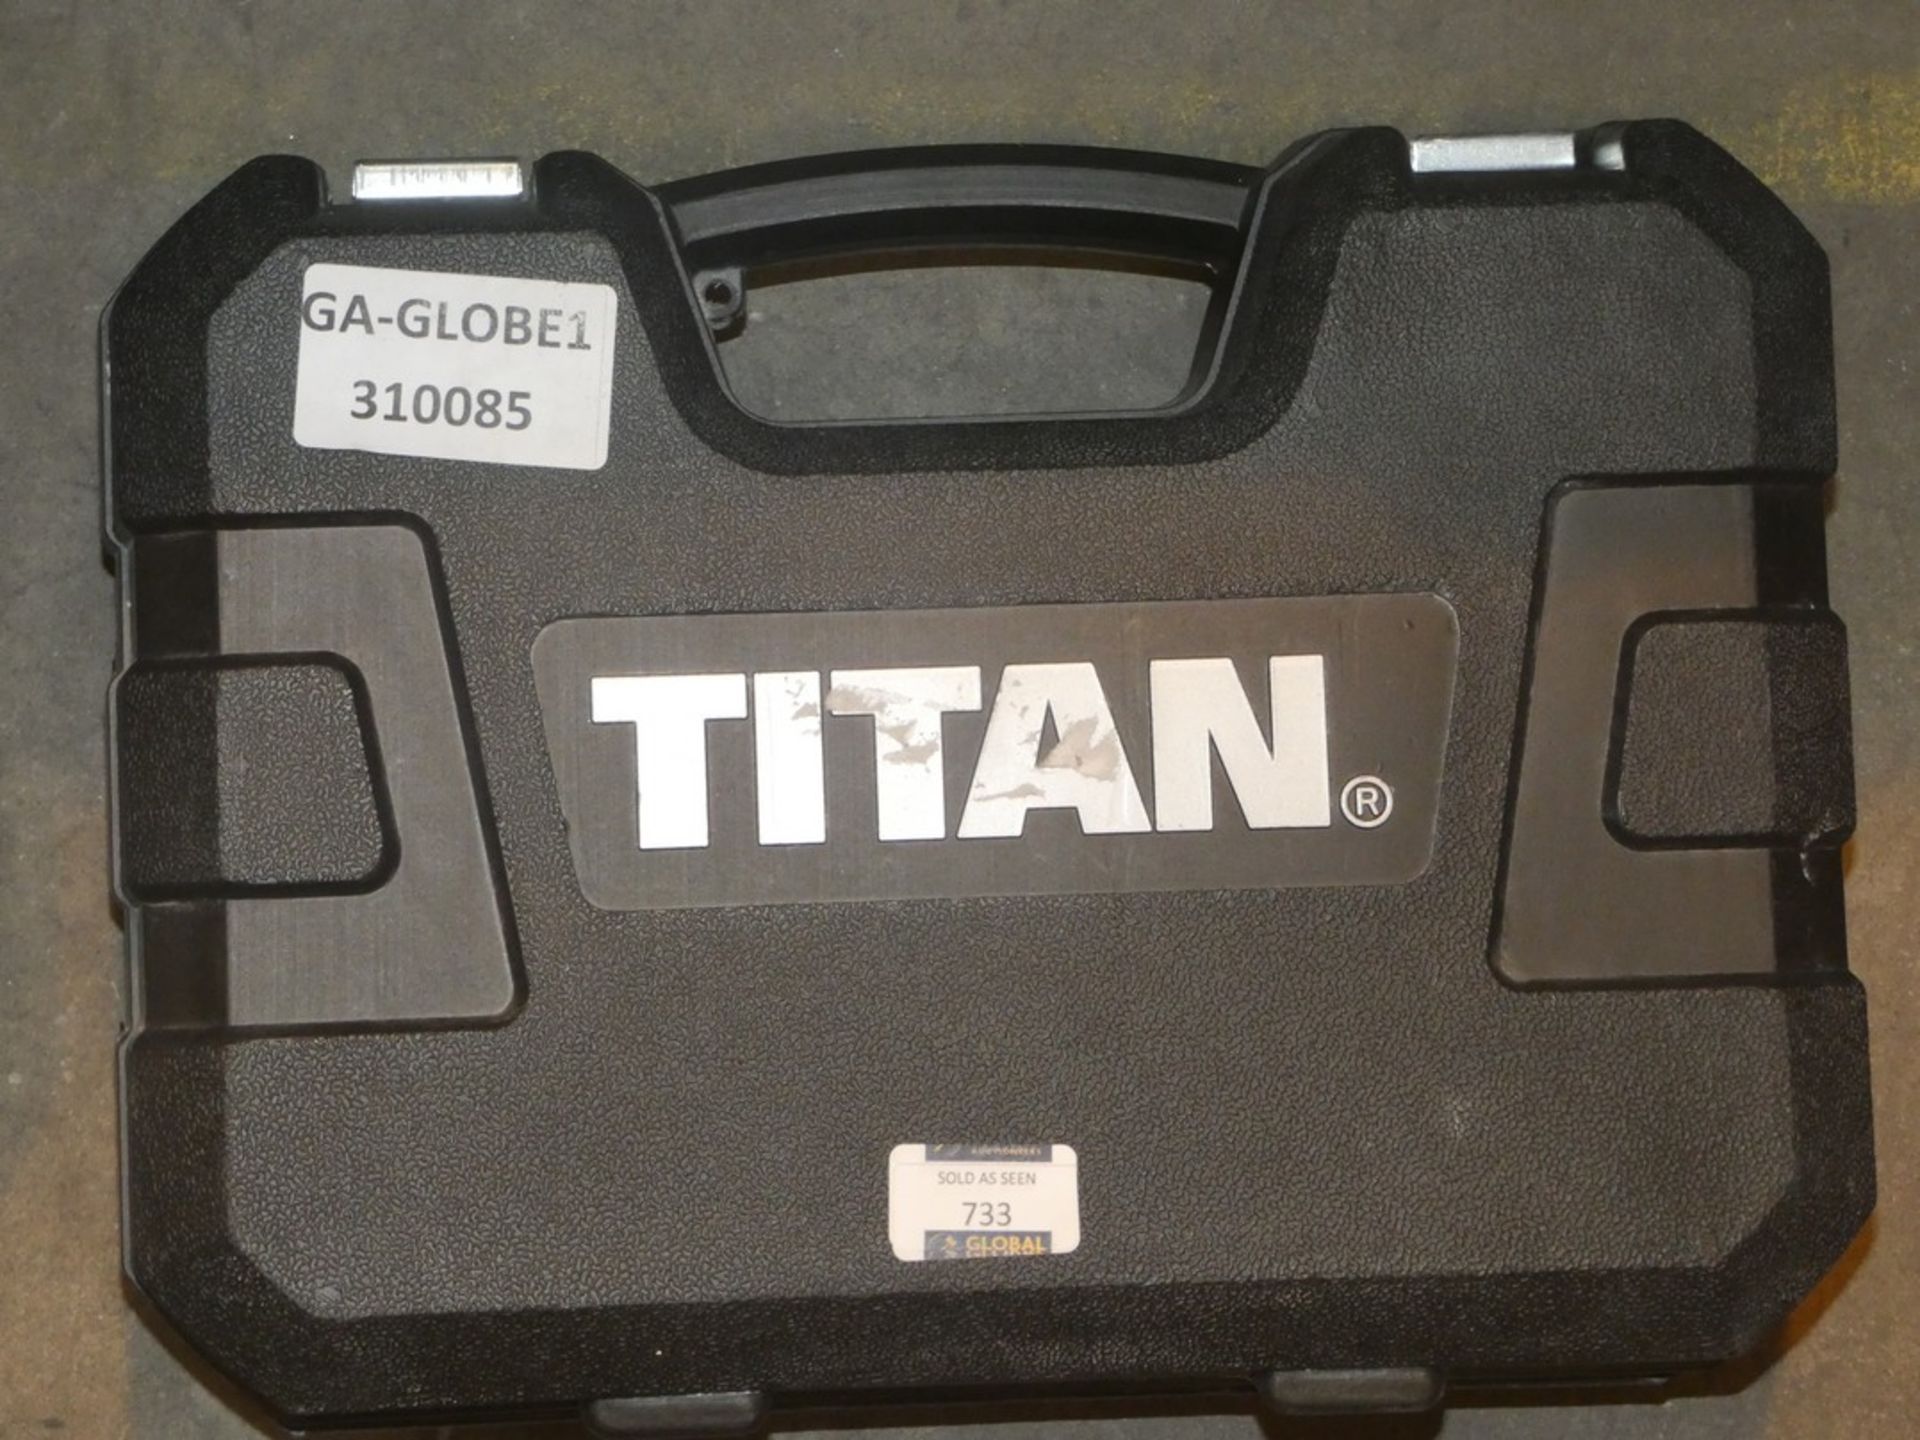 Lot to Contain 2 Assorted Graded Titan Power Tools to Include a Titan Orbital Sander and a Titan